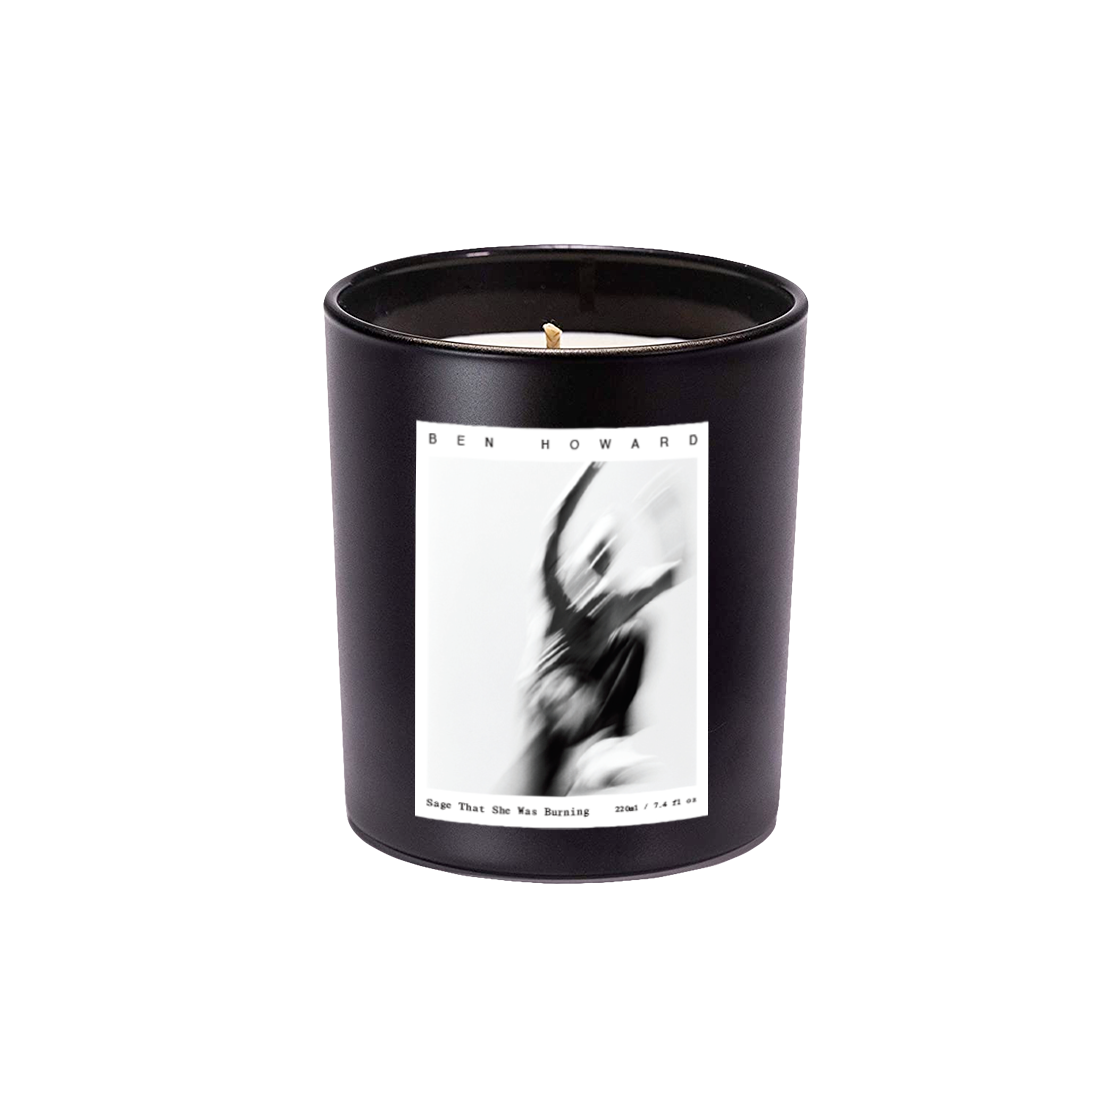 Ben Howard - 'Sage That She Was Burning' Candle